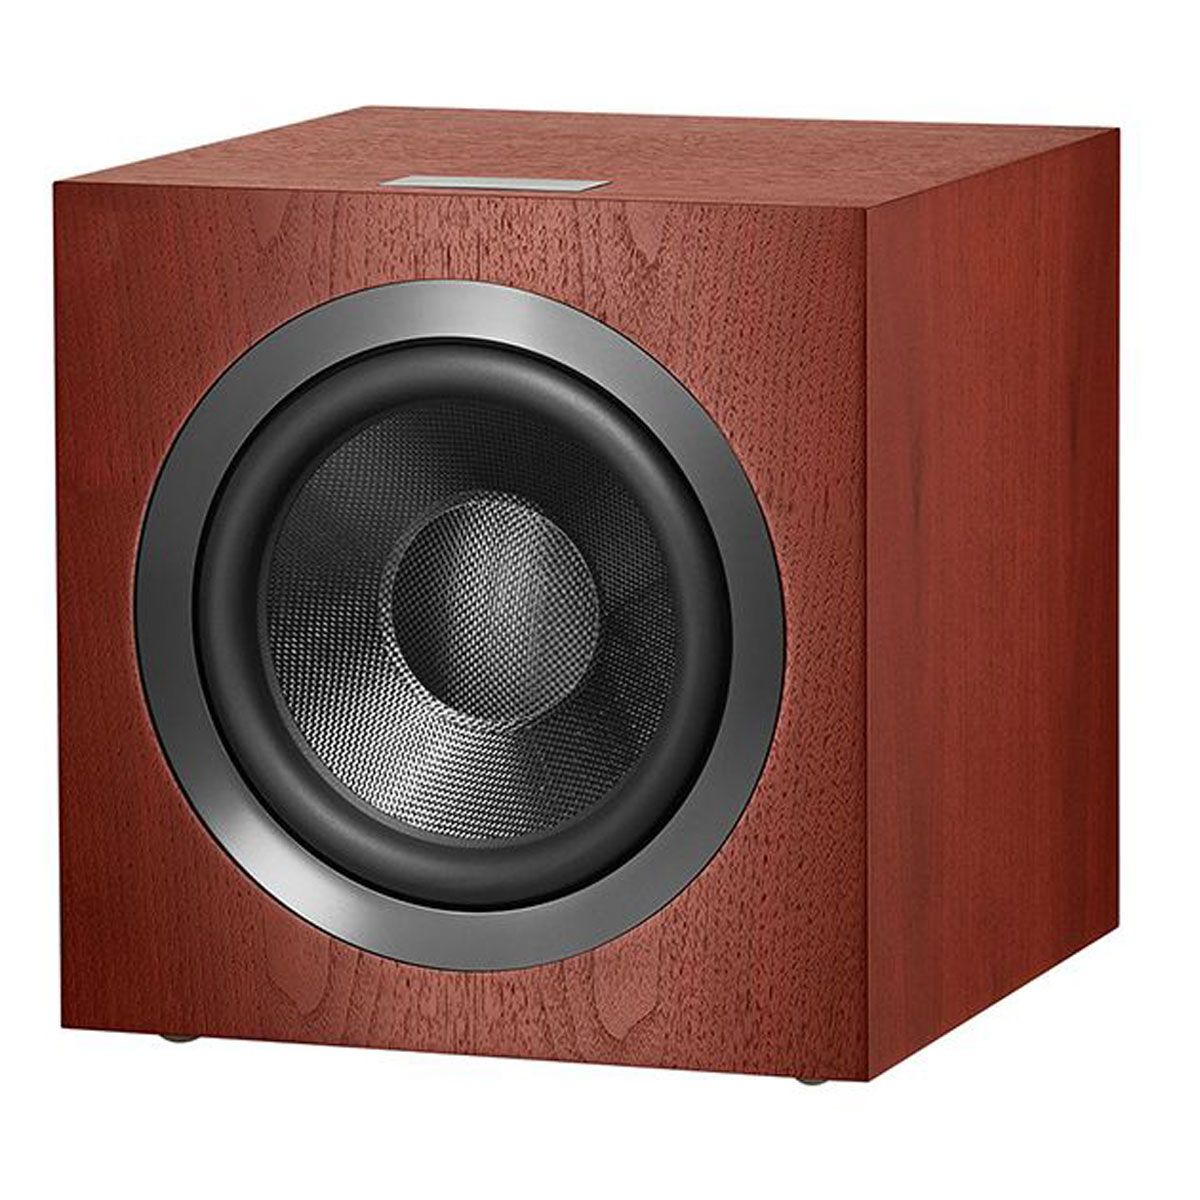 Bowers & Wilkins DB4S Subwoofer - Rosenut - Front angled view without grille